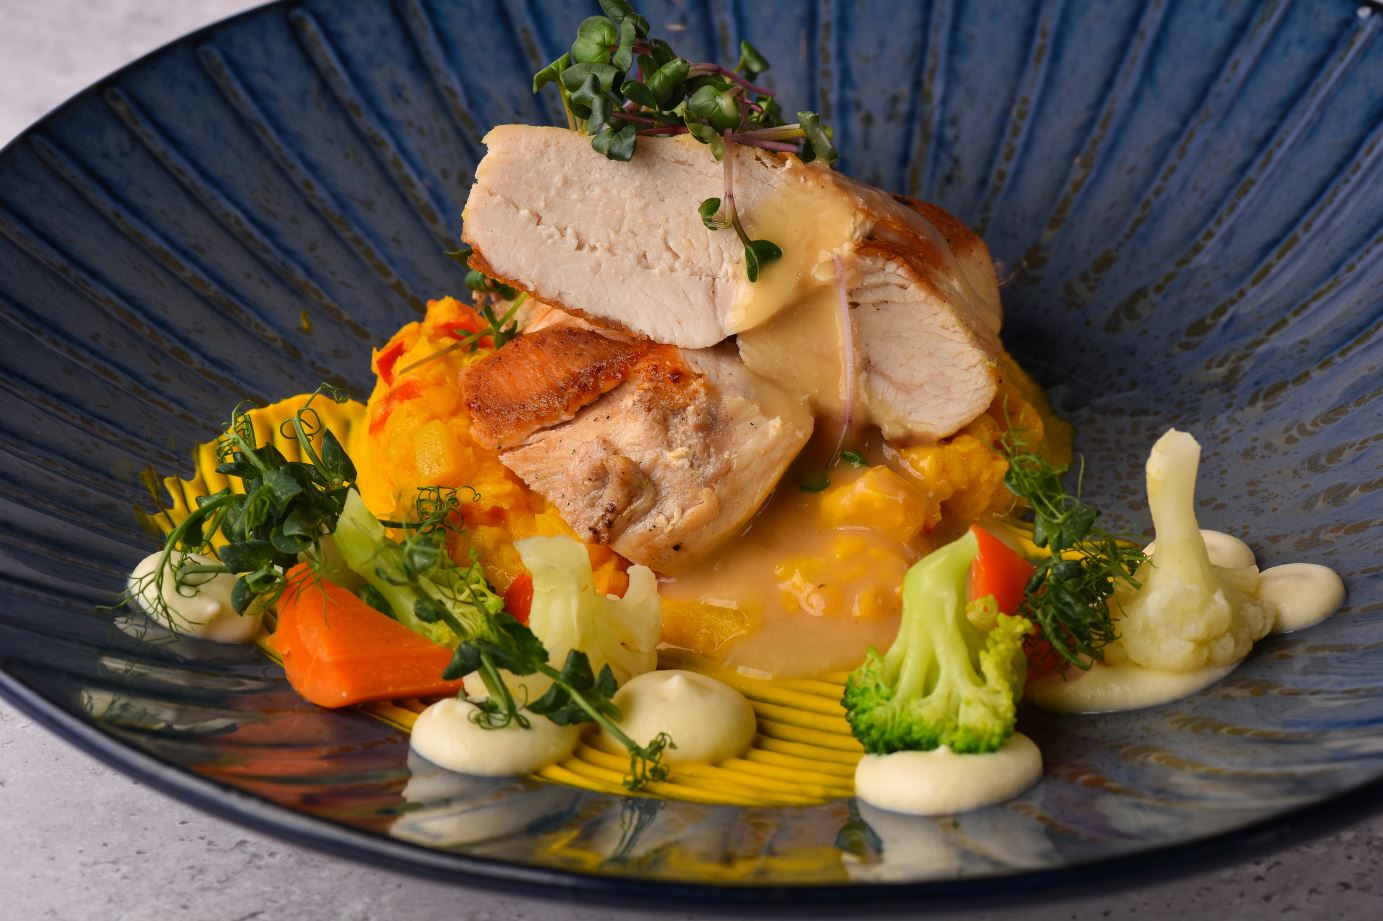 Chicken fillet with carrot puree and vegetables